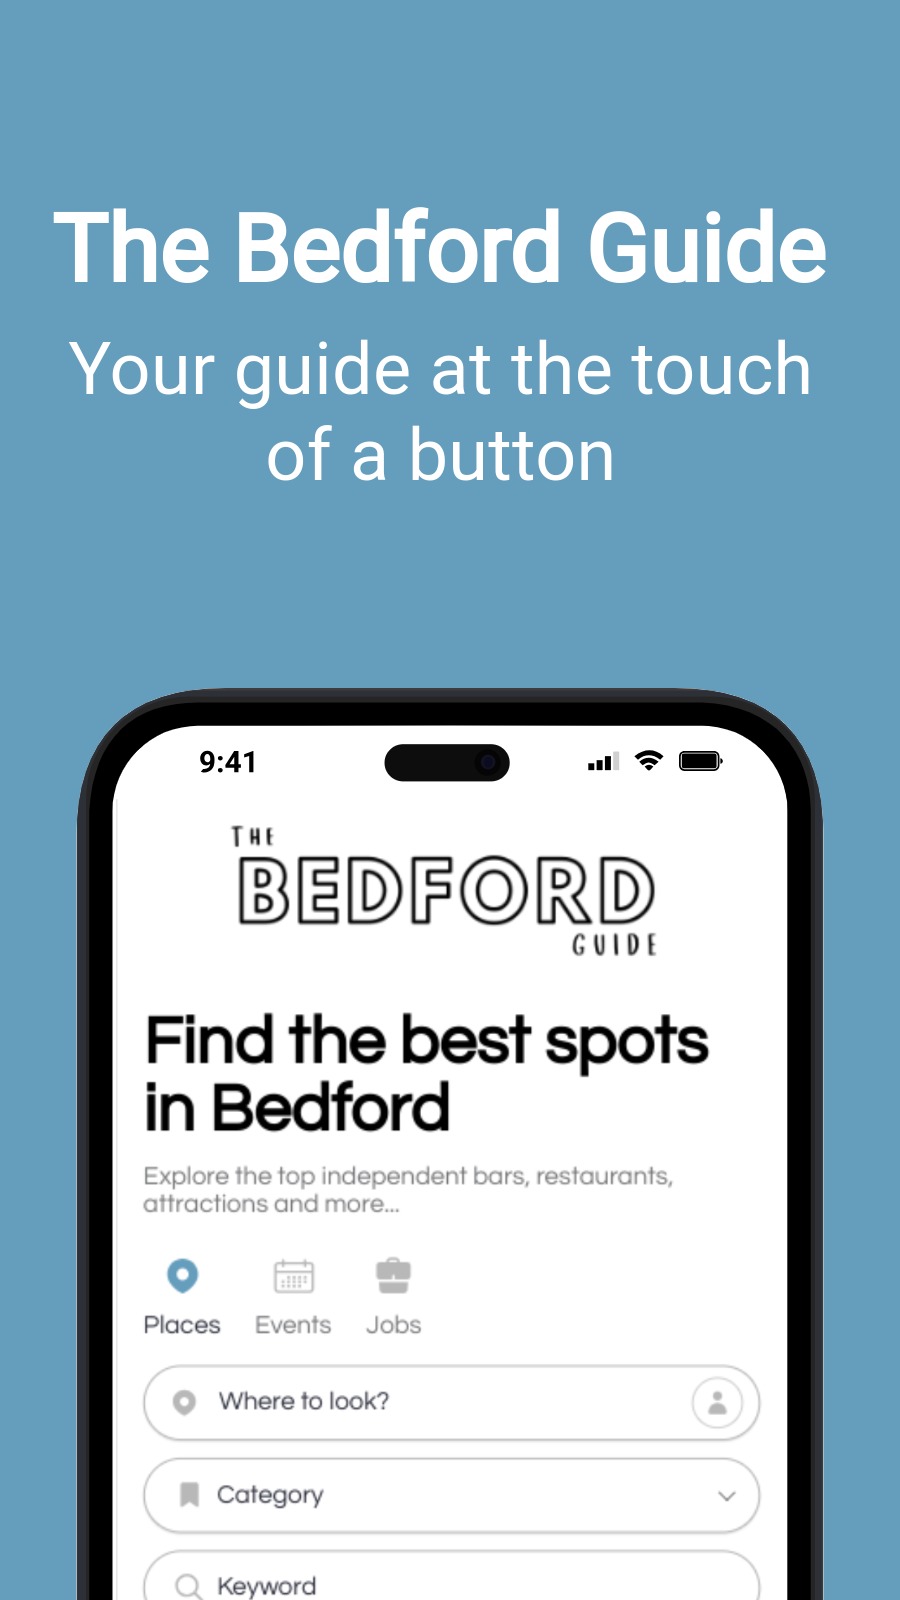 The Bedford Guide - Your guide at the touch of a button